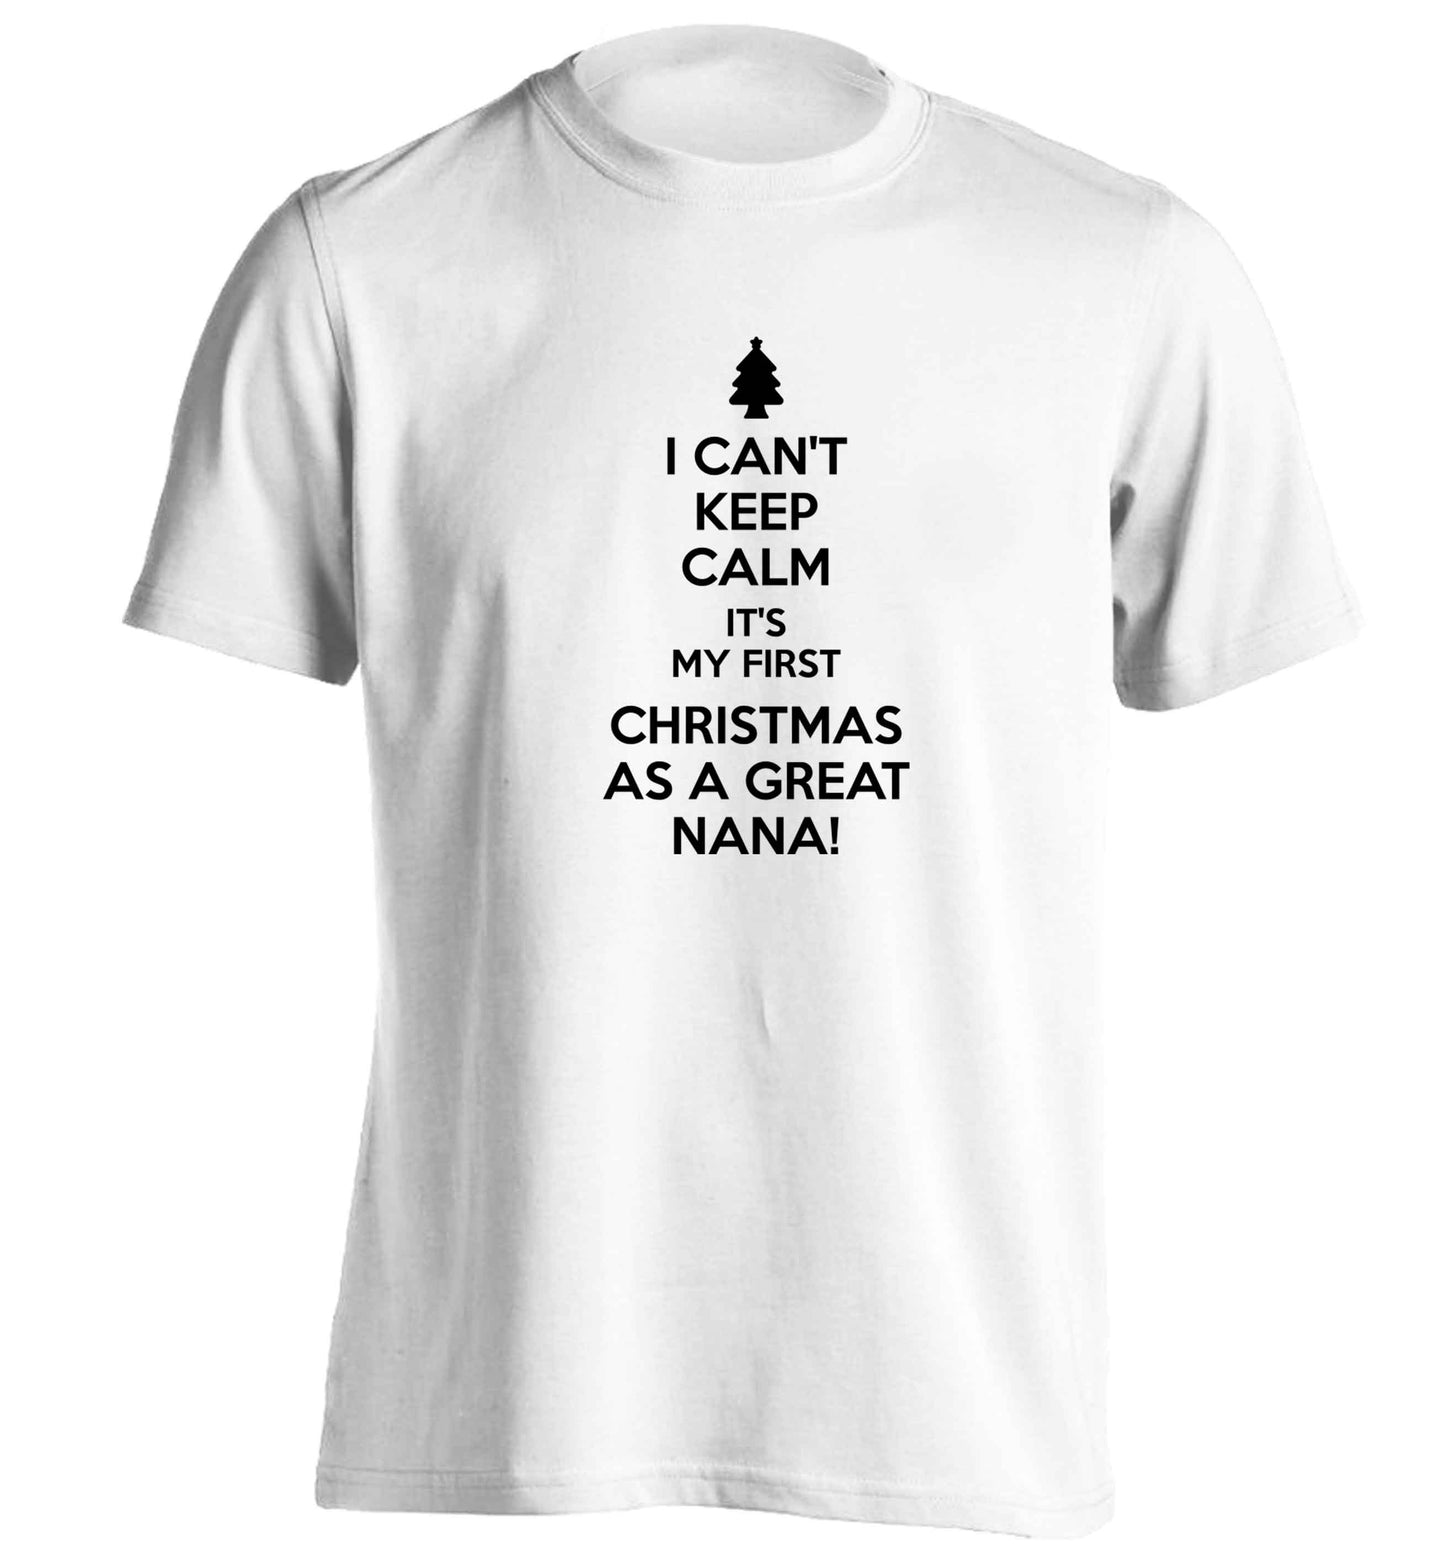 I can't keep calm it's my first Christmas as a great nana! adults unisex white Tshirt 2XL